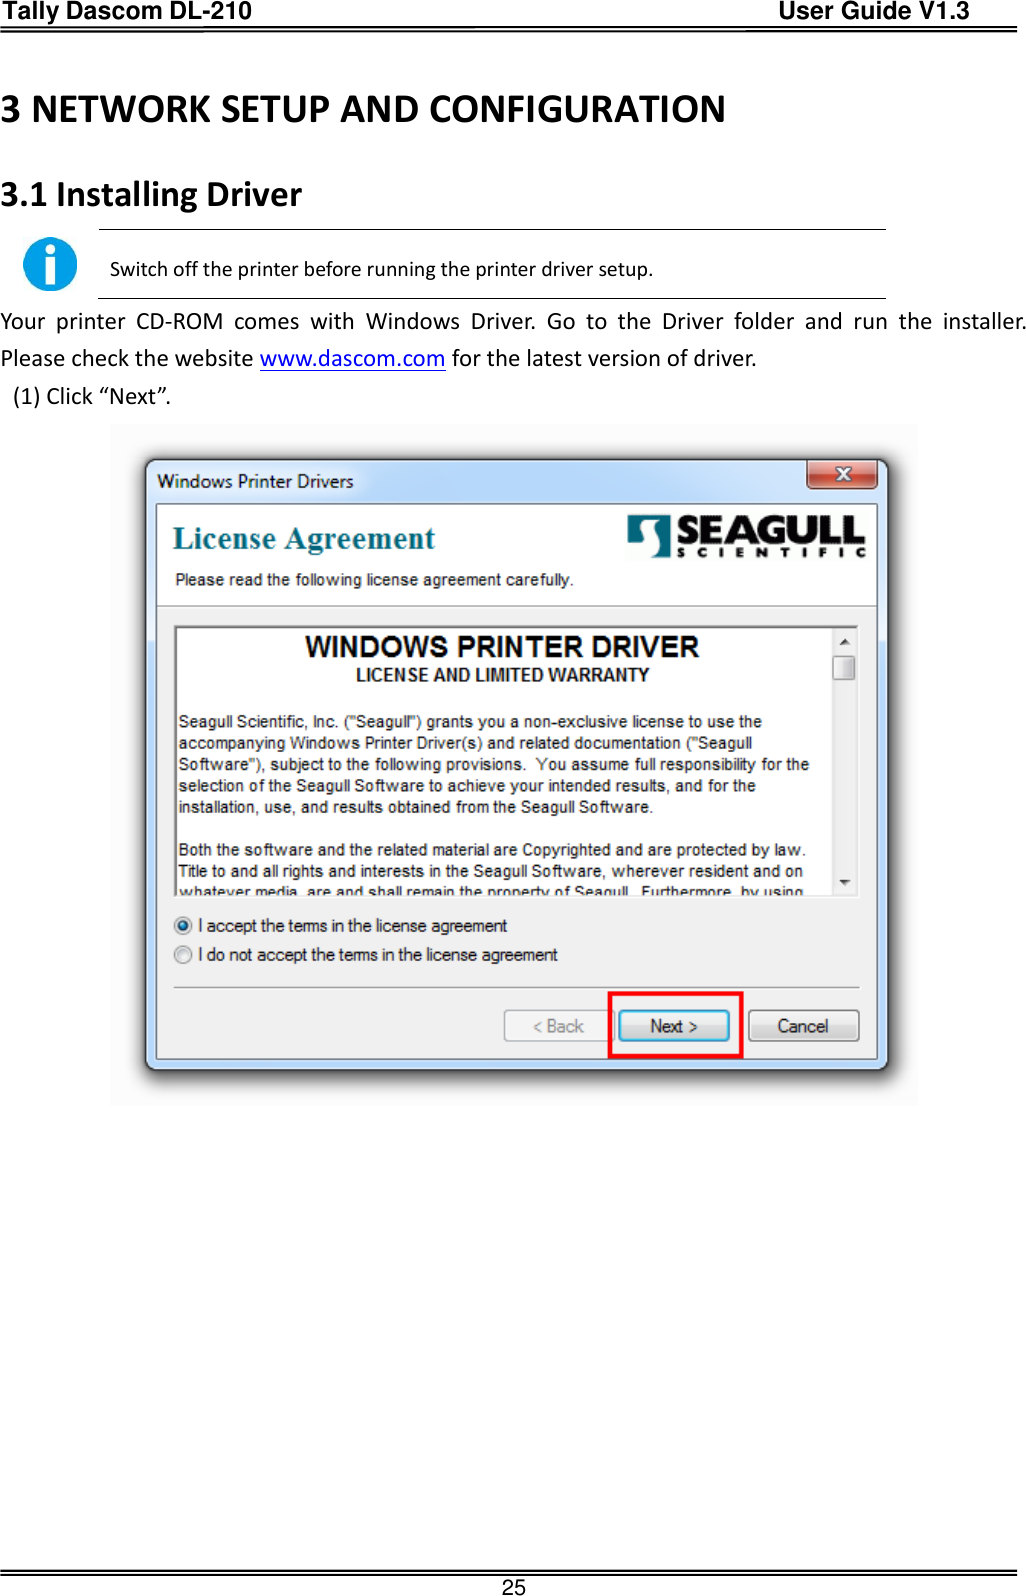 Tally Dascom DL-210                                          User Guide V1.3  25 3 NETWORK SETUP AND CONFIGURATION 3.1 Installing Driver  Switch off the printer before running the printer driver setup. Your  printer  CD-ROM  comes  with  Windows  Driver.  Go  to  the  Driver  folder  and  run  the  installer. Please check the website www.dascom.com for the latest version of driver.   (1) Click “Next”.  